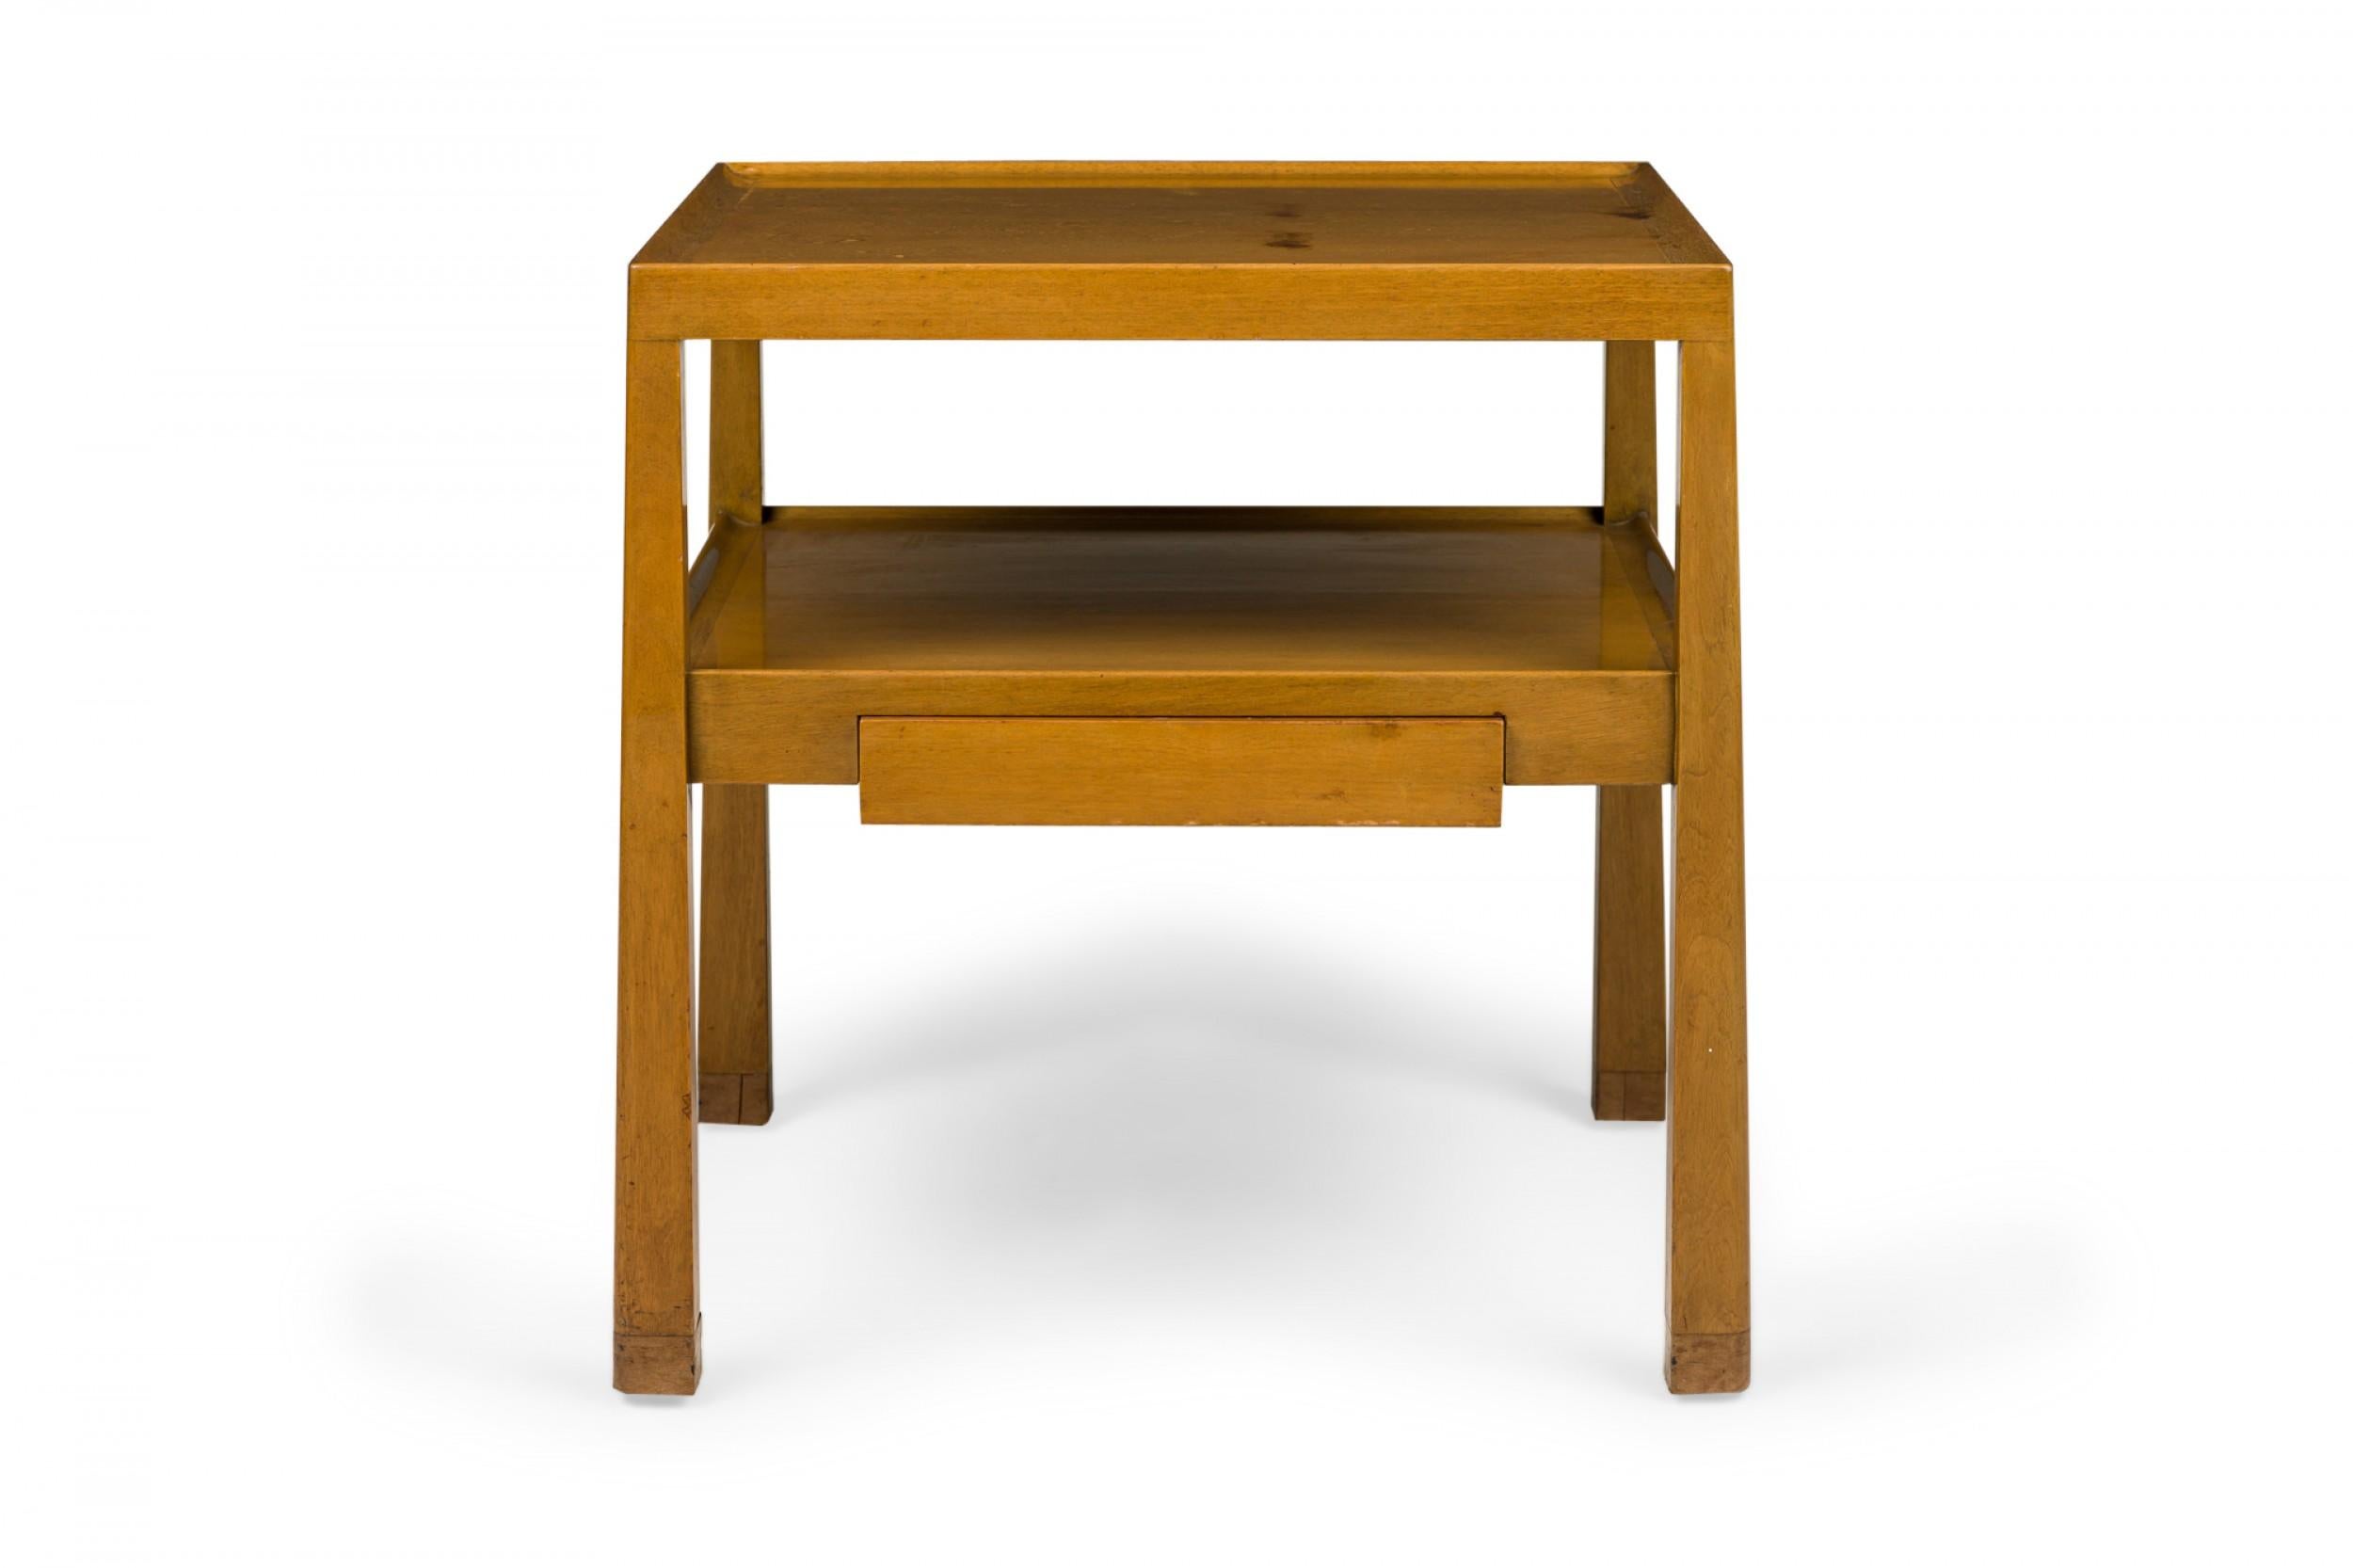 American Mid-Century two-tier end / side table with a square top with a shallow gallery above a lower shelf containing a single drawer supported by two reverse tapered legs. (EDWARD WORMLEY FOR DUNBAR FURNITURE COMPANY)(Similar table: DUF0759)
